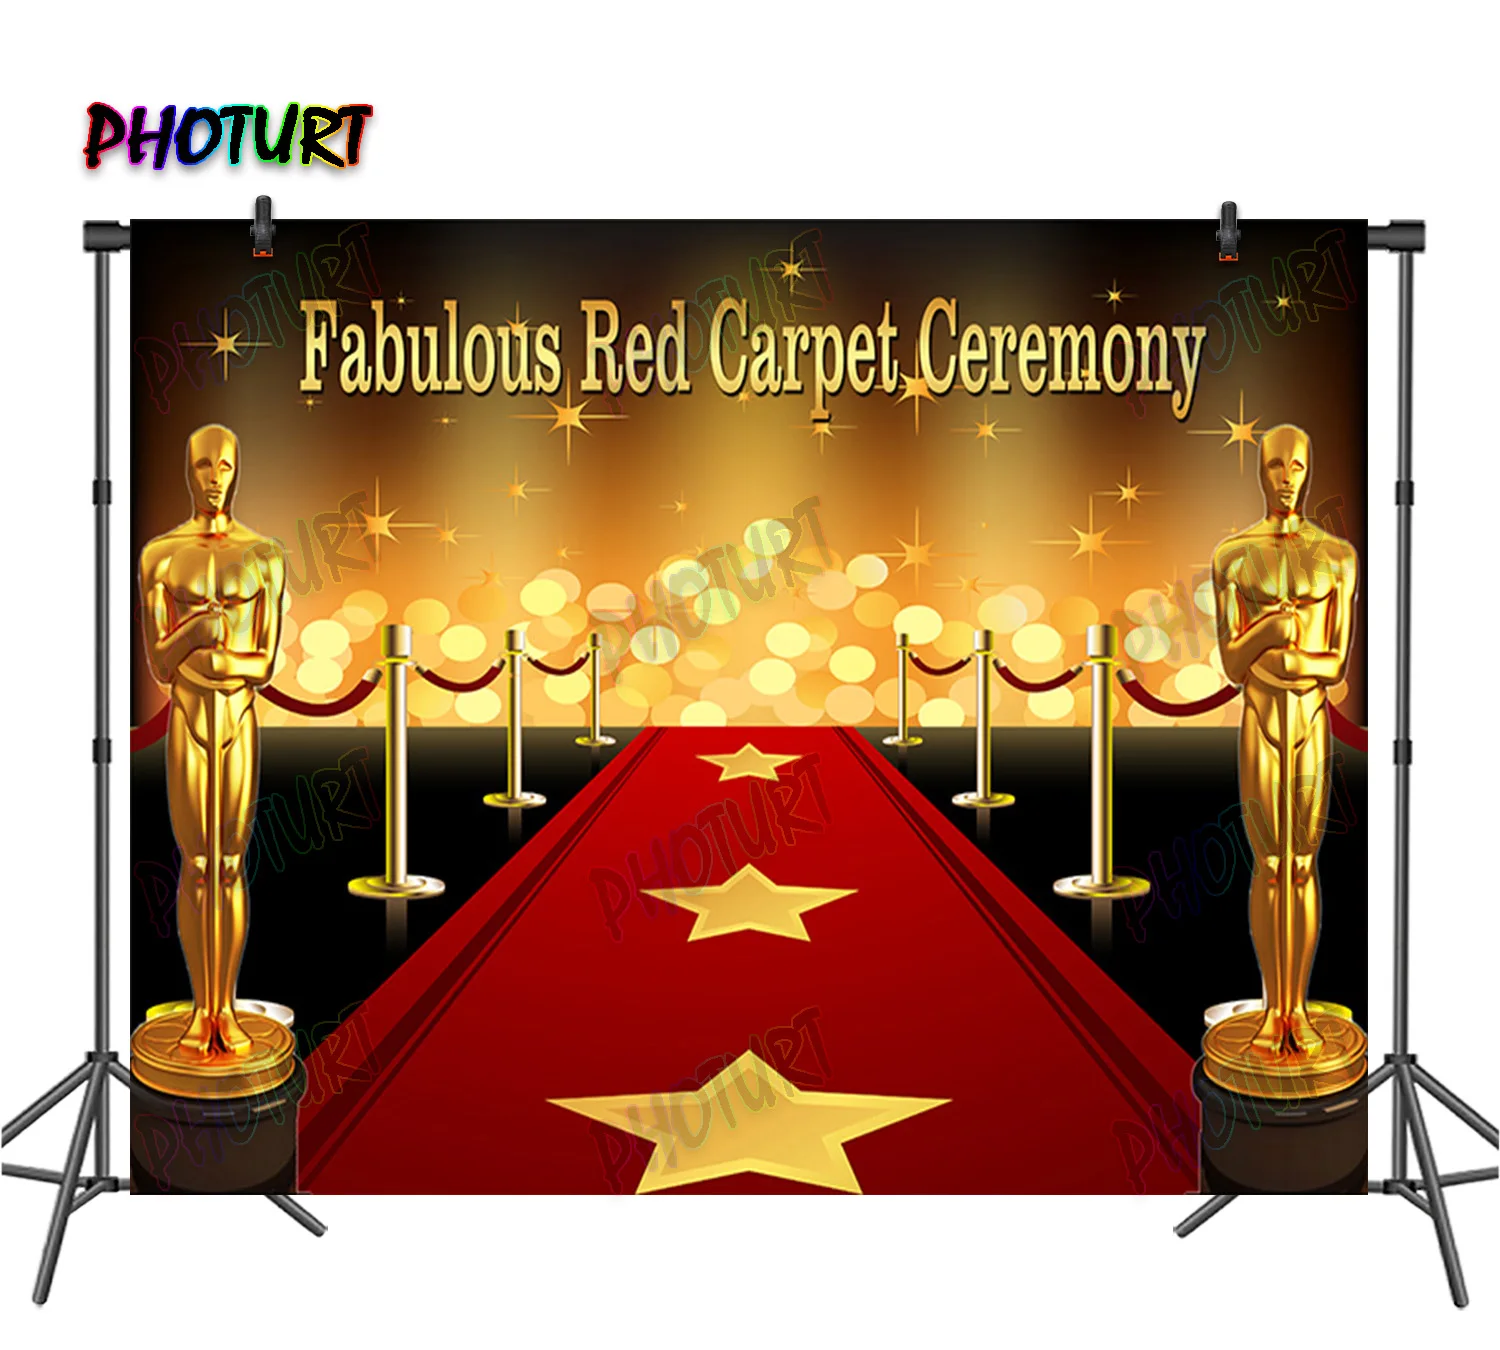 

PHOTURT Red Carpet Ceremony Backdrop Birthday Party Photography Banner Golden Statue Photo Background Decorate Props